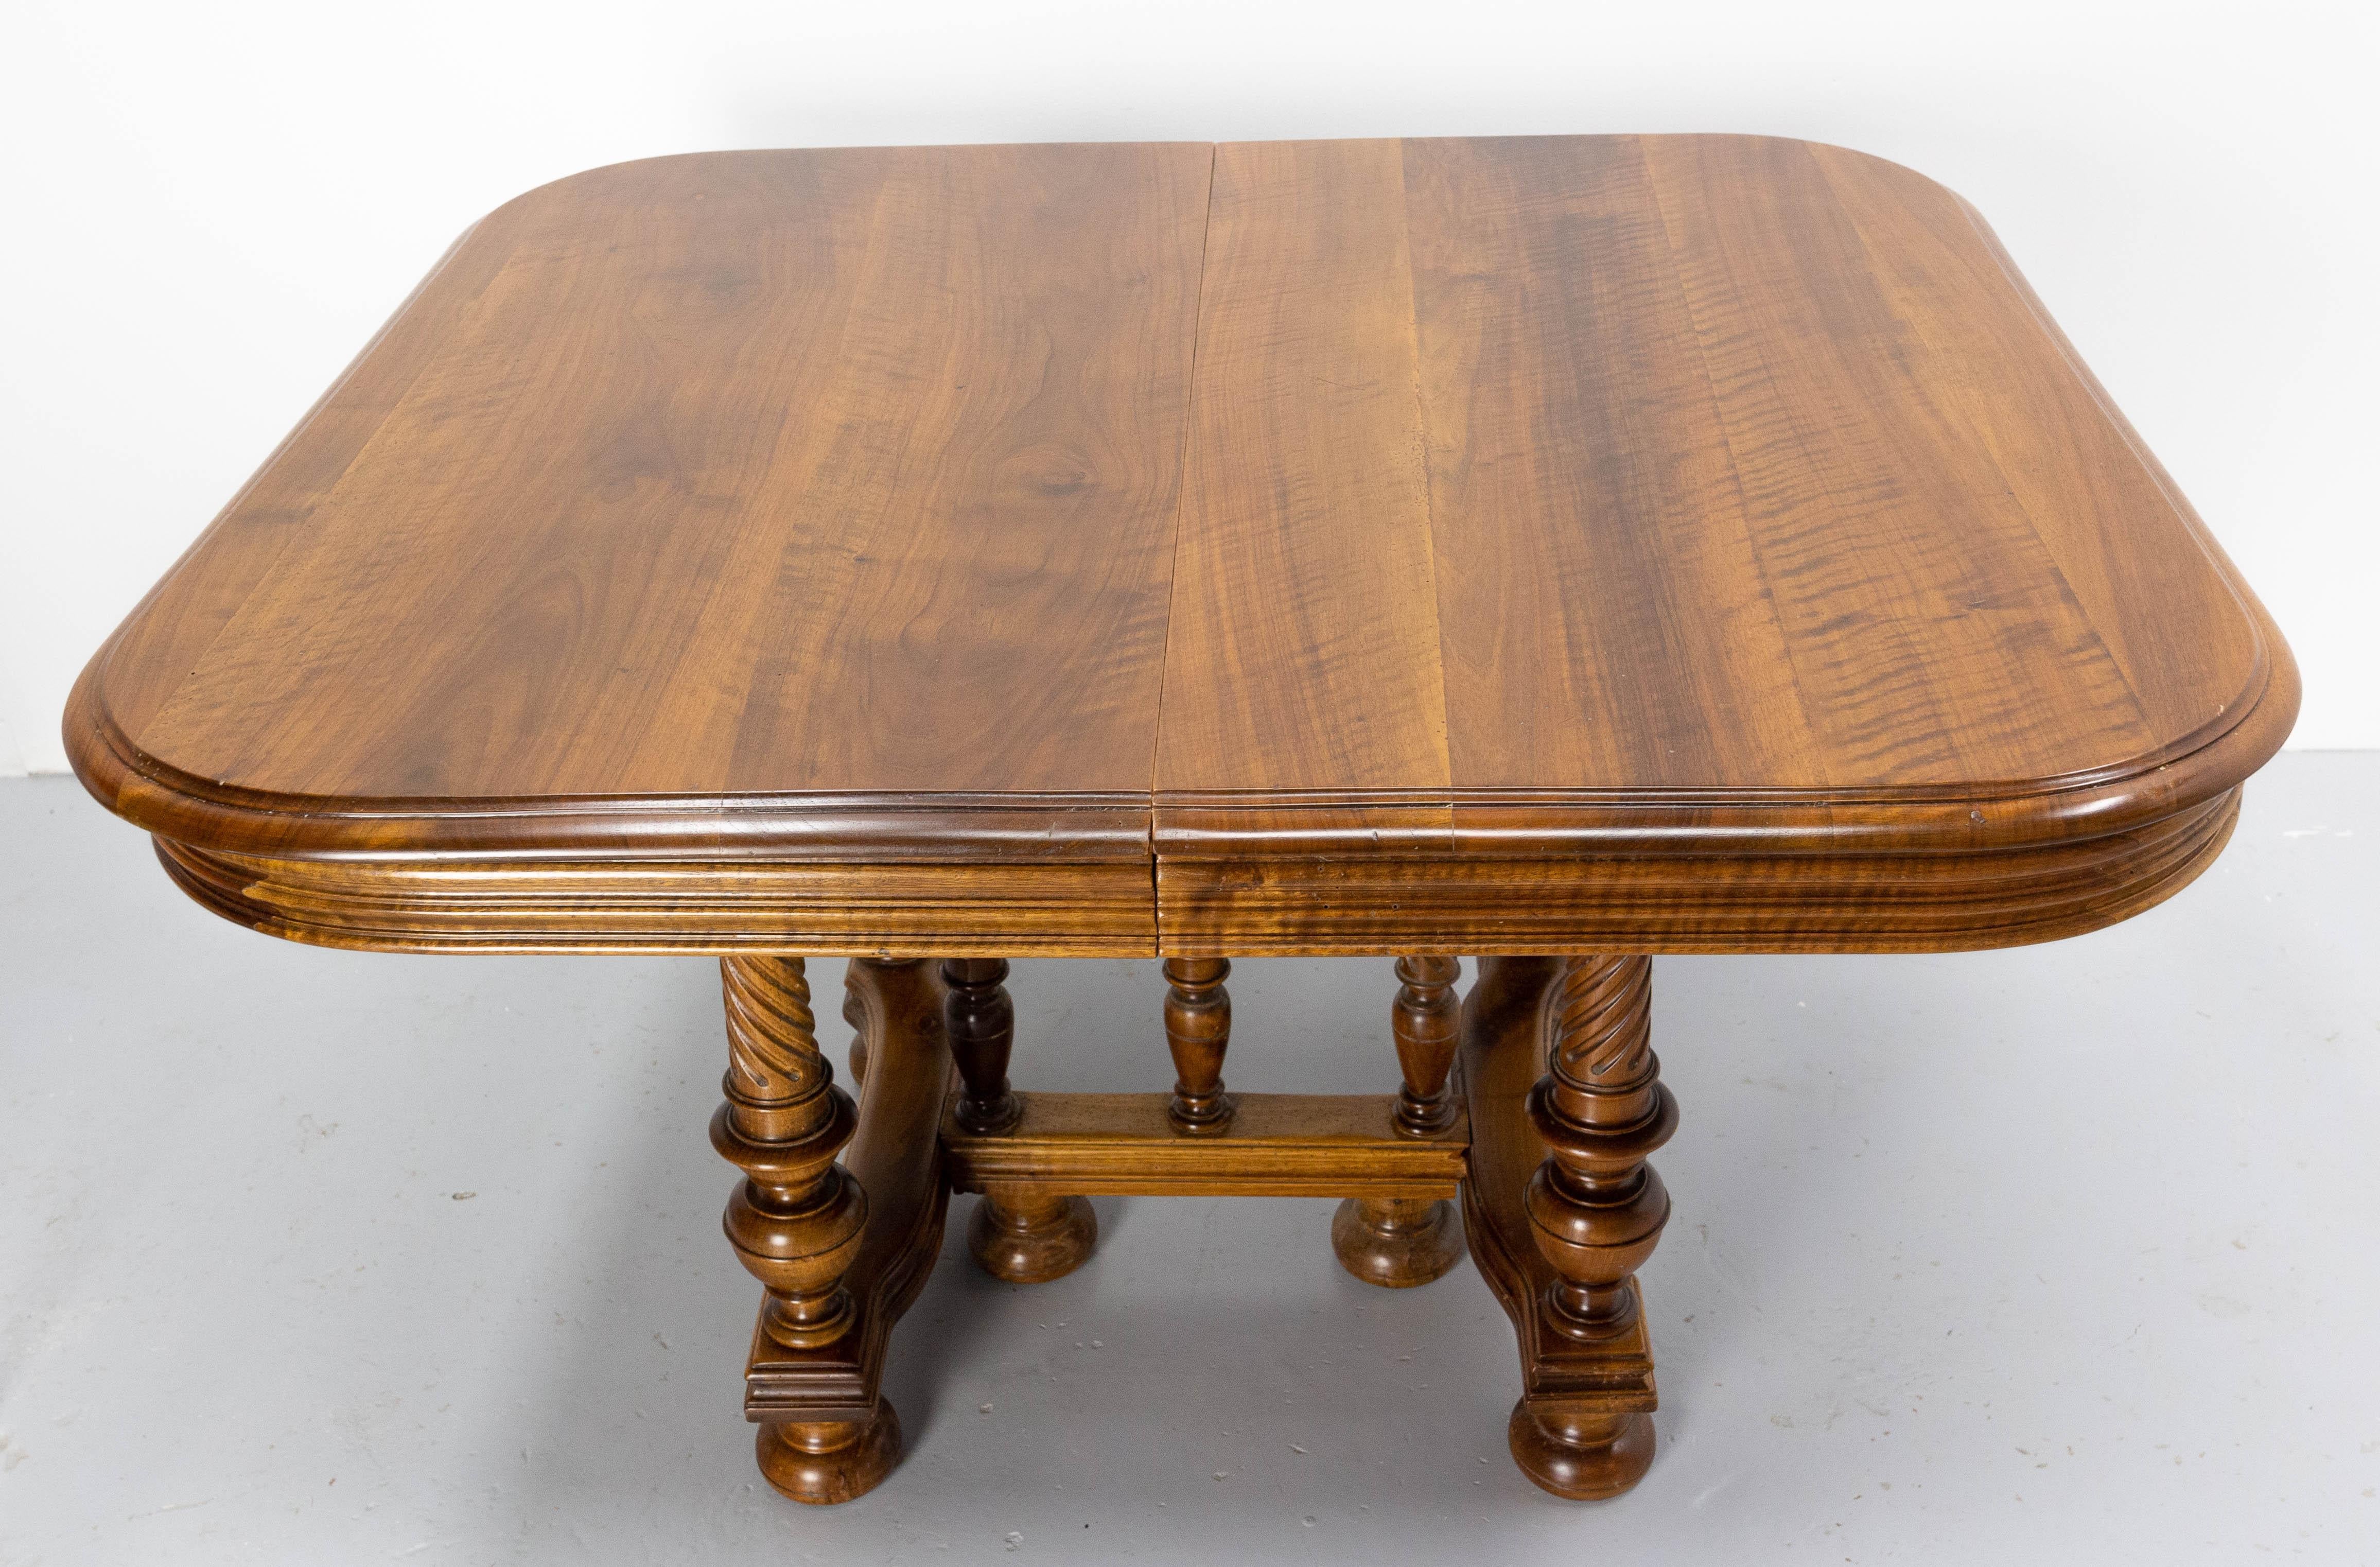 Walnut French Beech Dining Extended Table Louis XIII Style, Late 19th Century For Sale